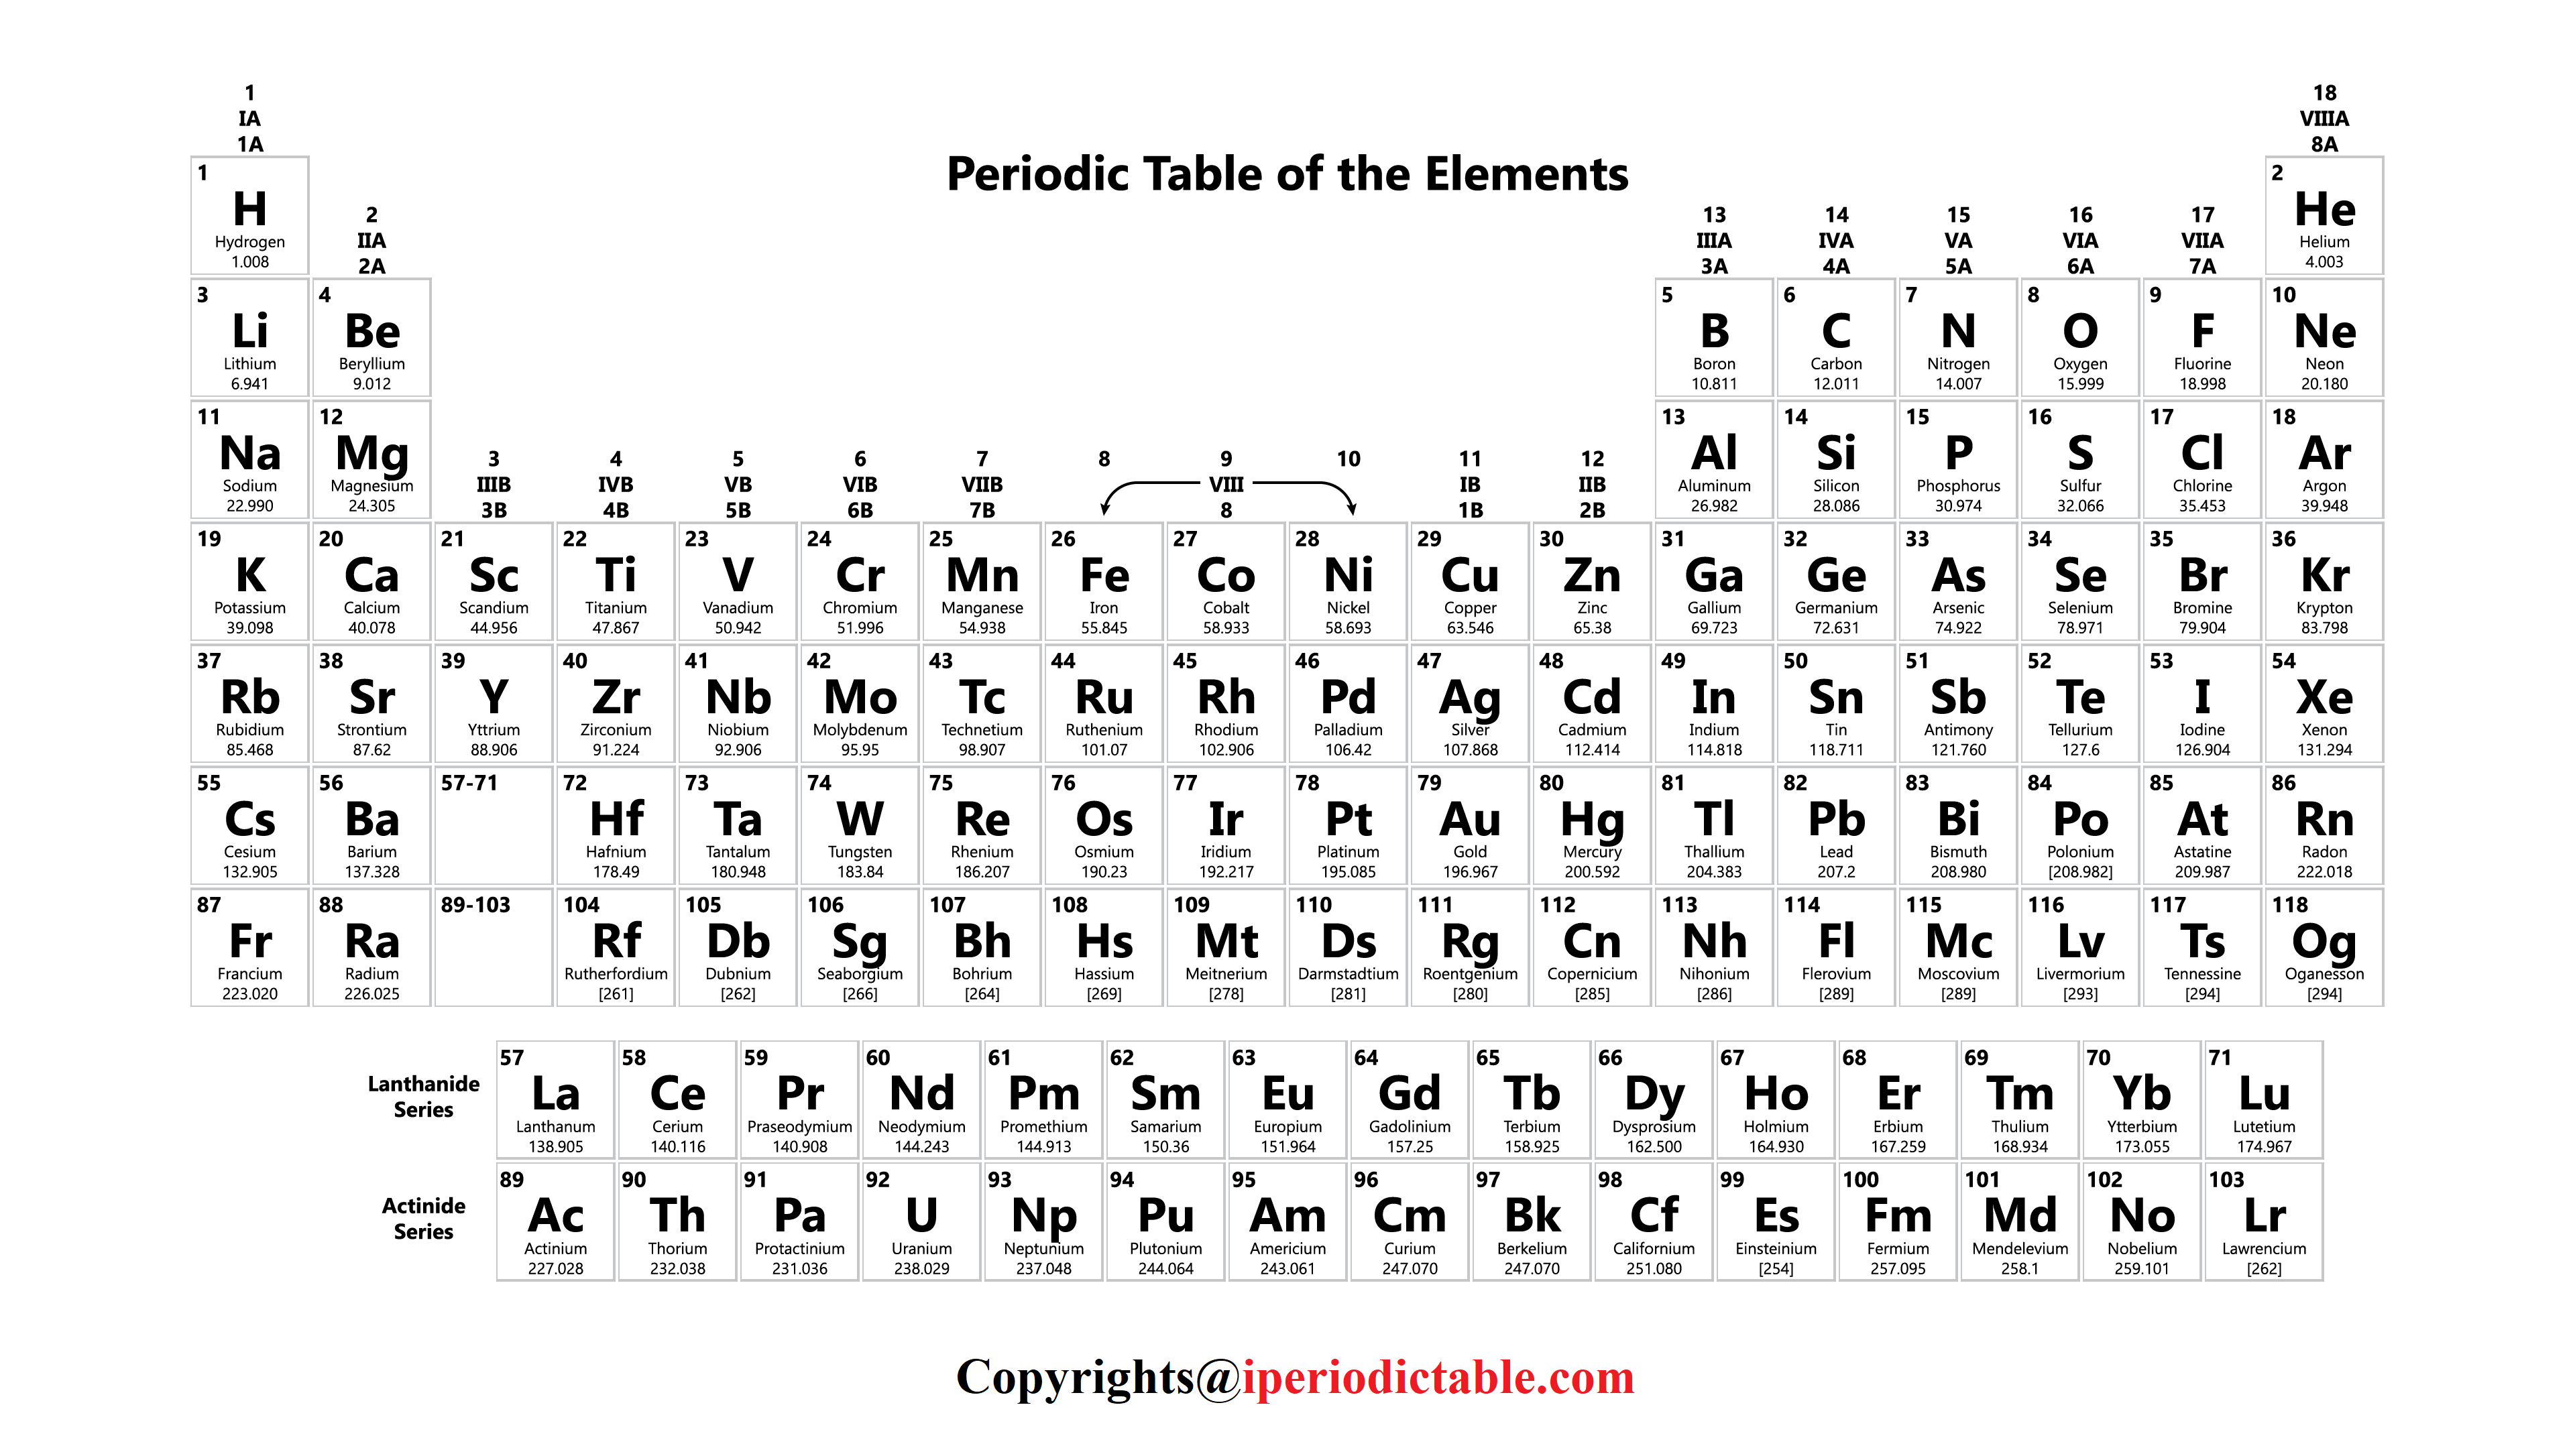 printable blank grid for the periodic table of elements